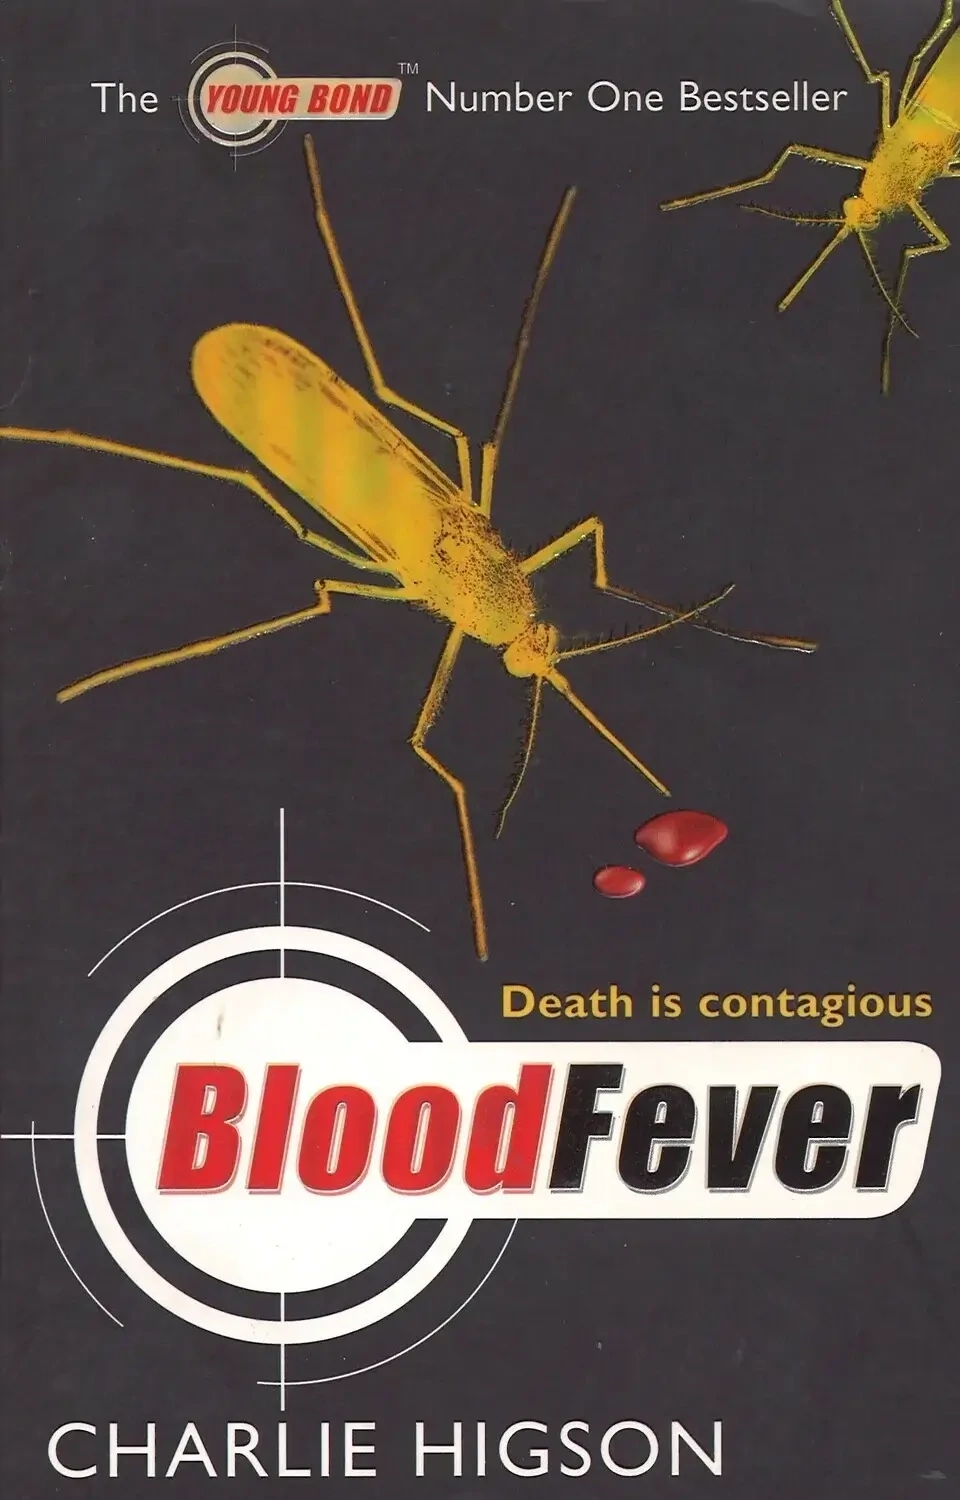 Blood Fever (Young Bond series Book 2) by Charlie Higson